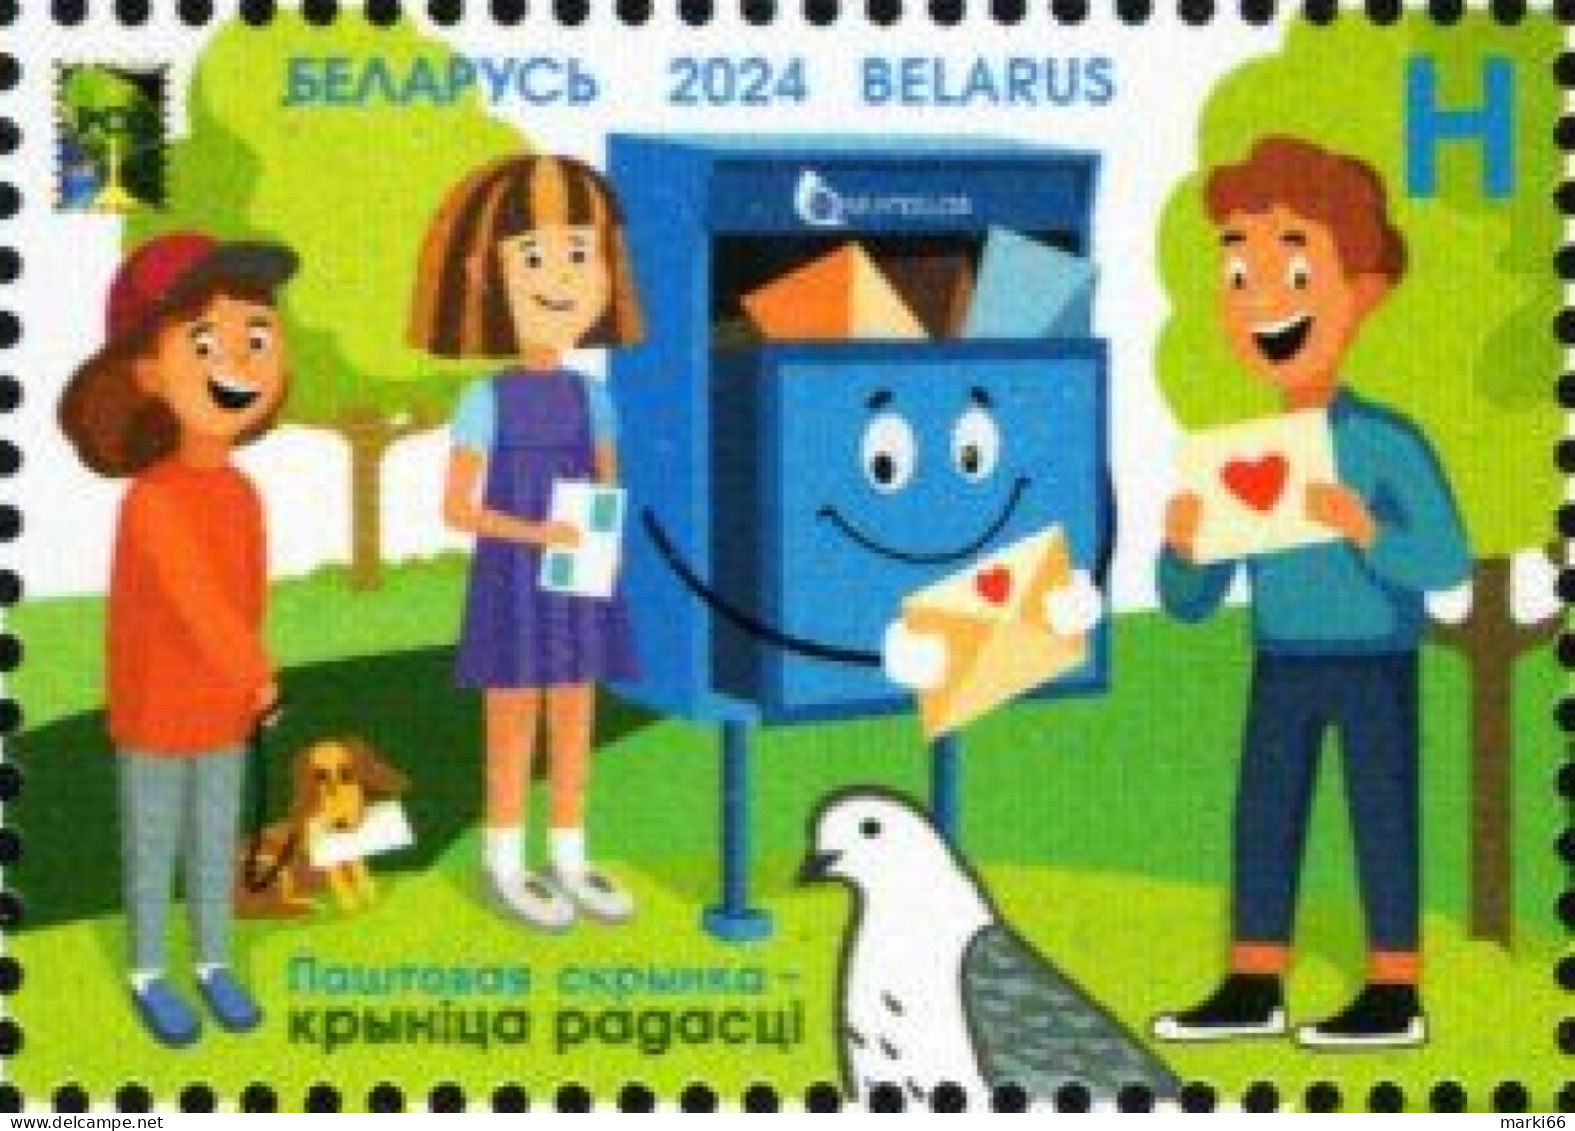 Belarus - 2024 - Postboxes - RCC Common Issue - Mint Stamp - Belarus